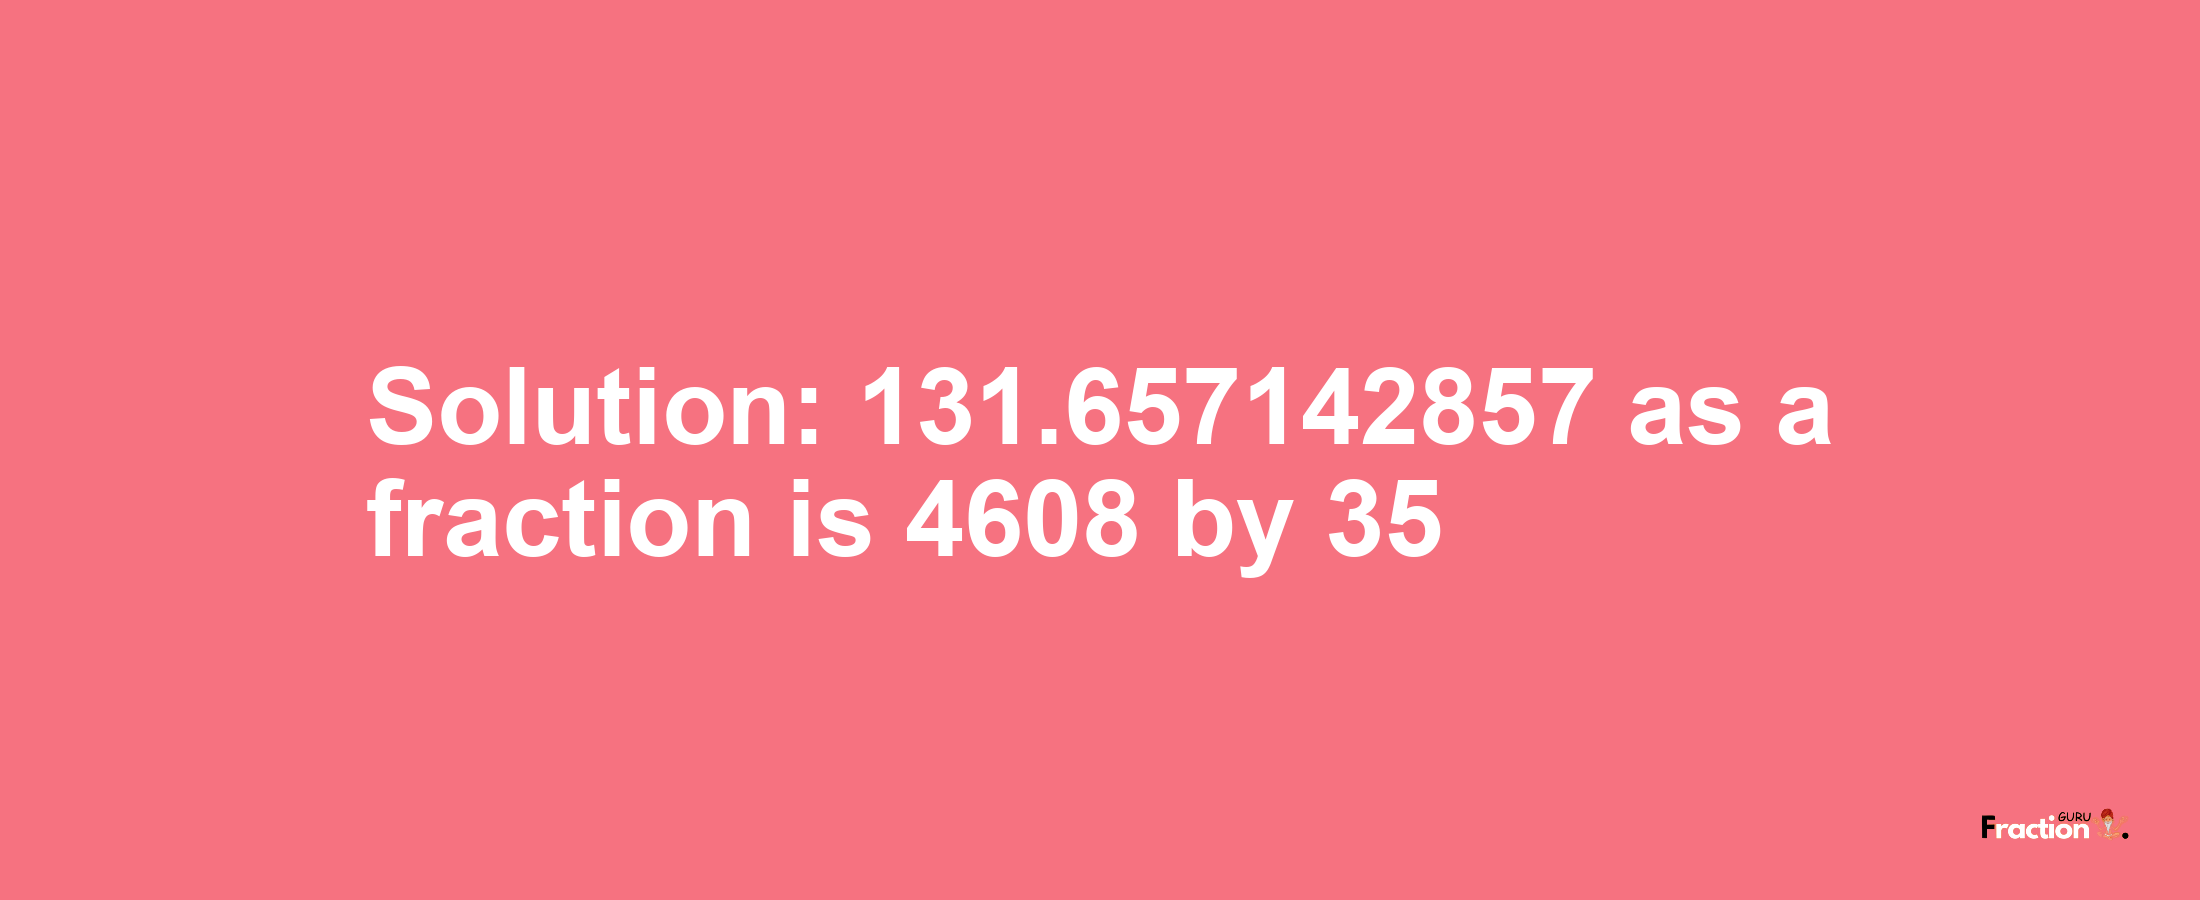 Solution:131.657142857 as a fraction is 4608/35